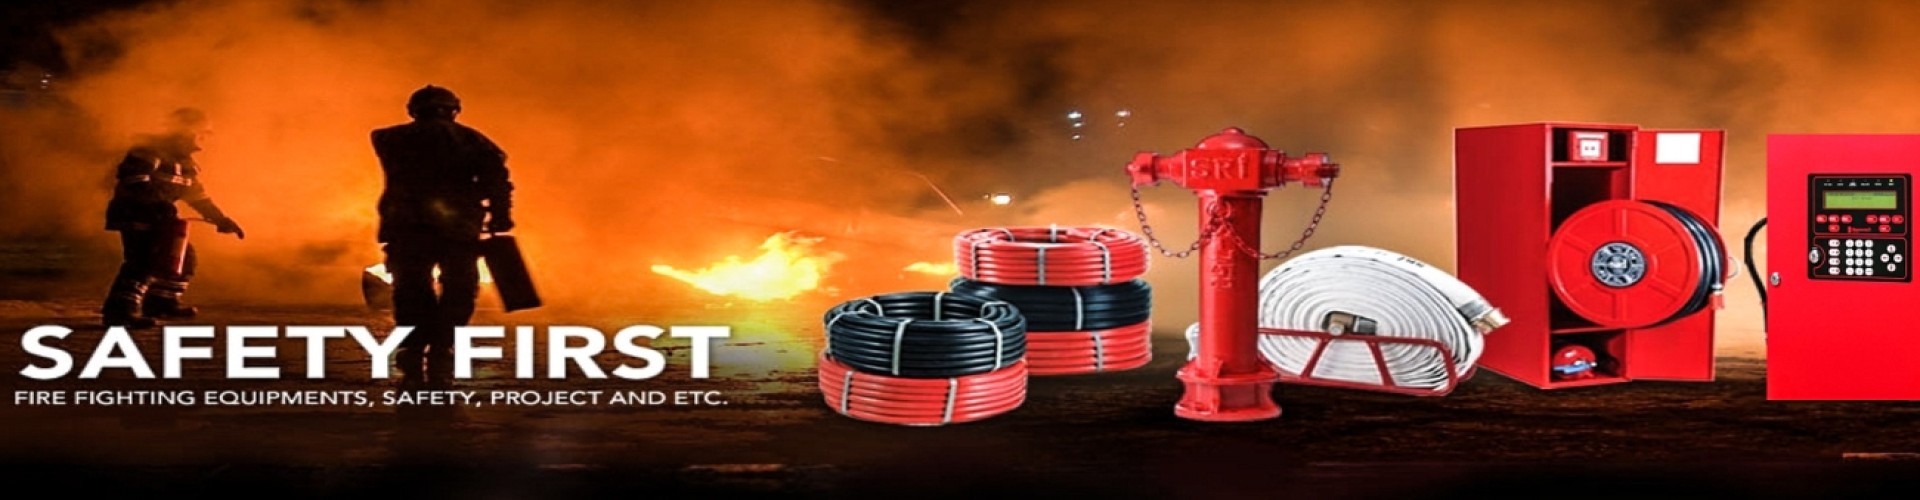 best-fire-safety-company-in-bangladesh.jpg